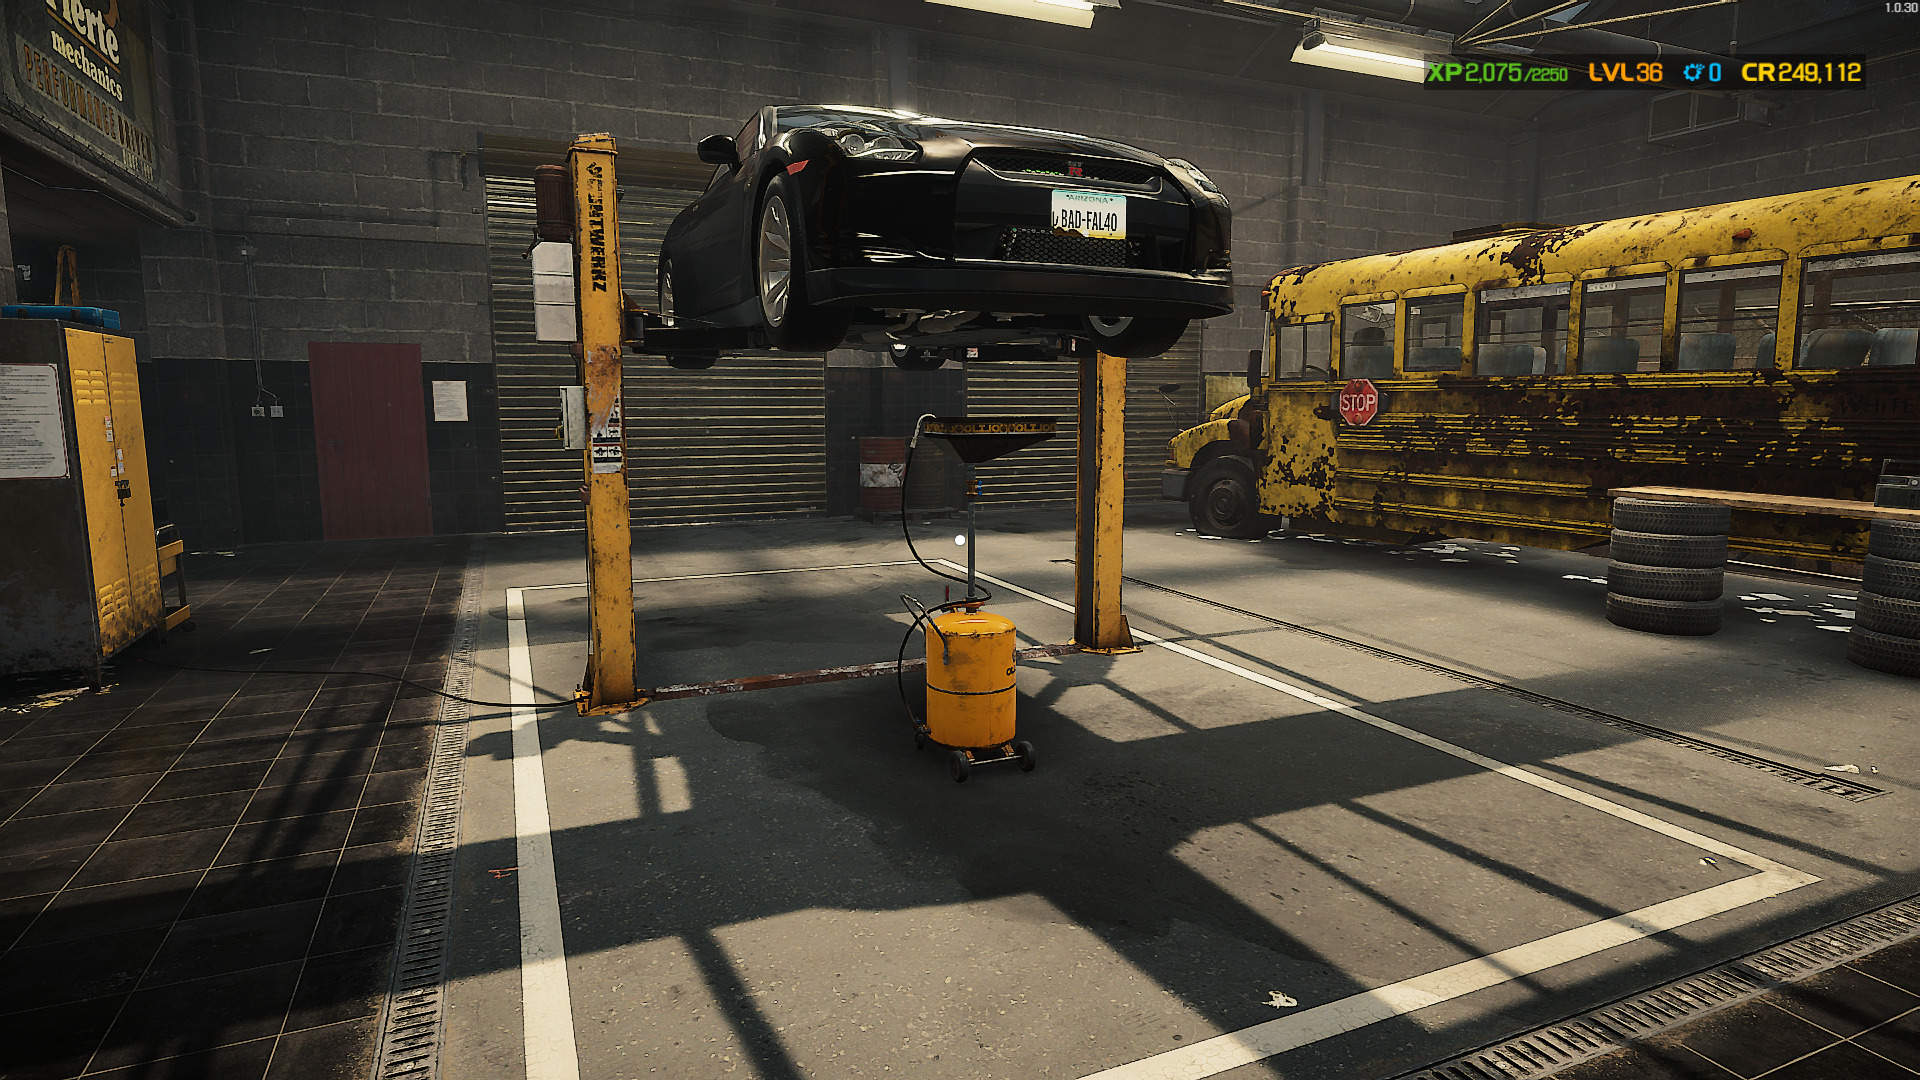 Use the Oil Drain Tool to get the old oil out of the car in Car Mechanic Simulator. 